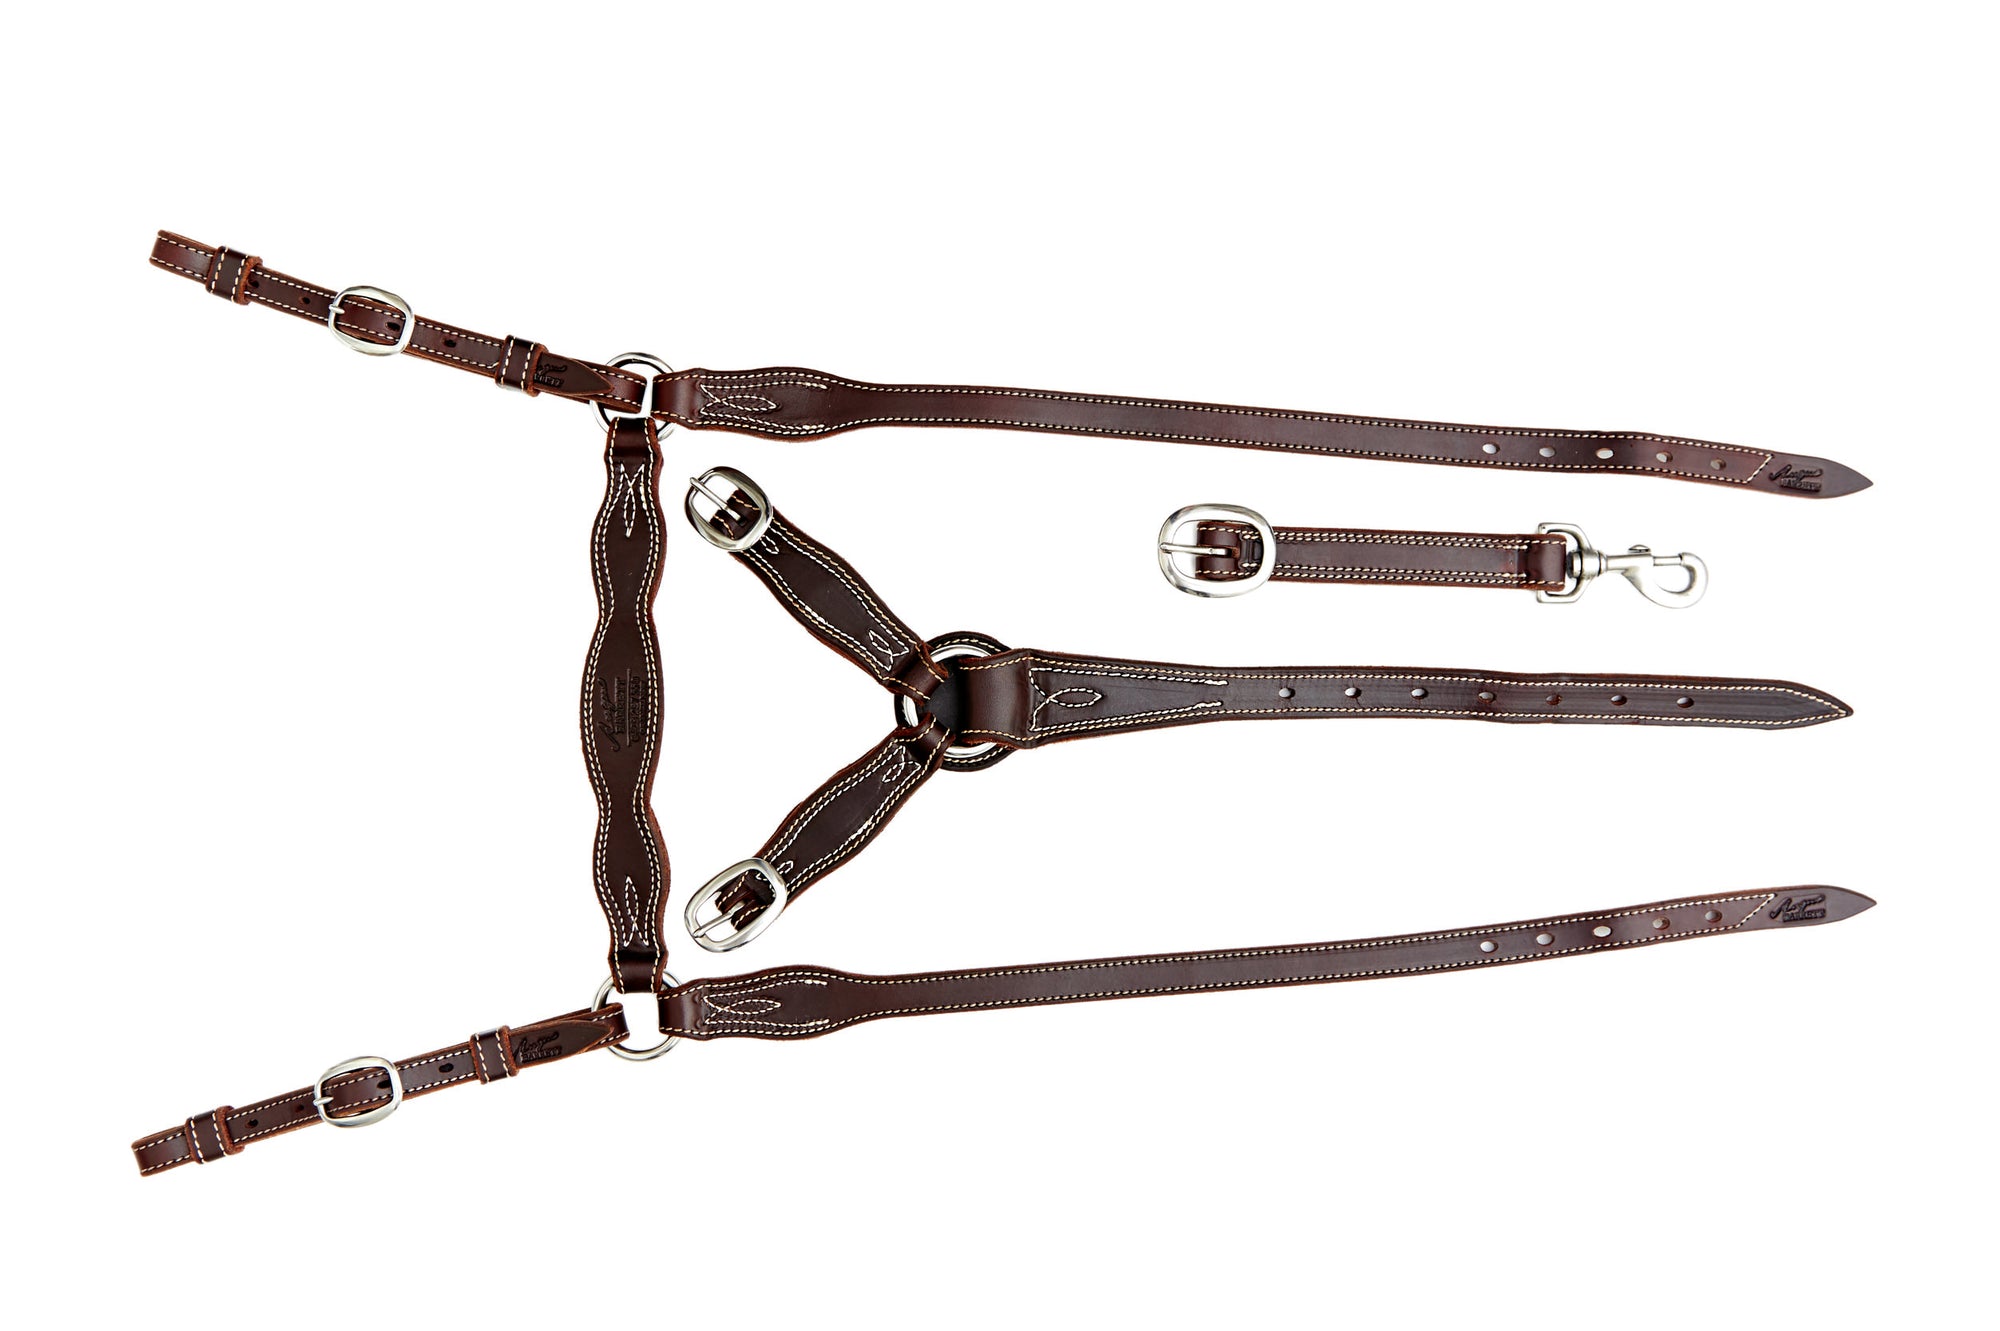 Angus Barrett Station Breastplate - Dark Natural Leather with Brass Hardware - Fully Stitched